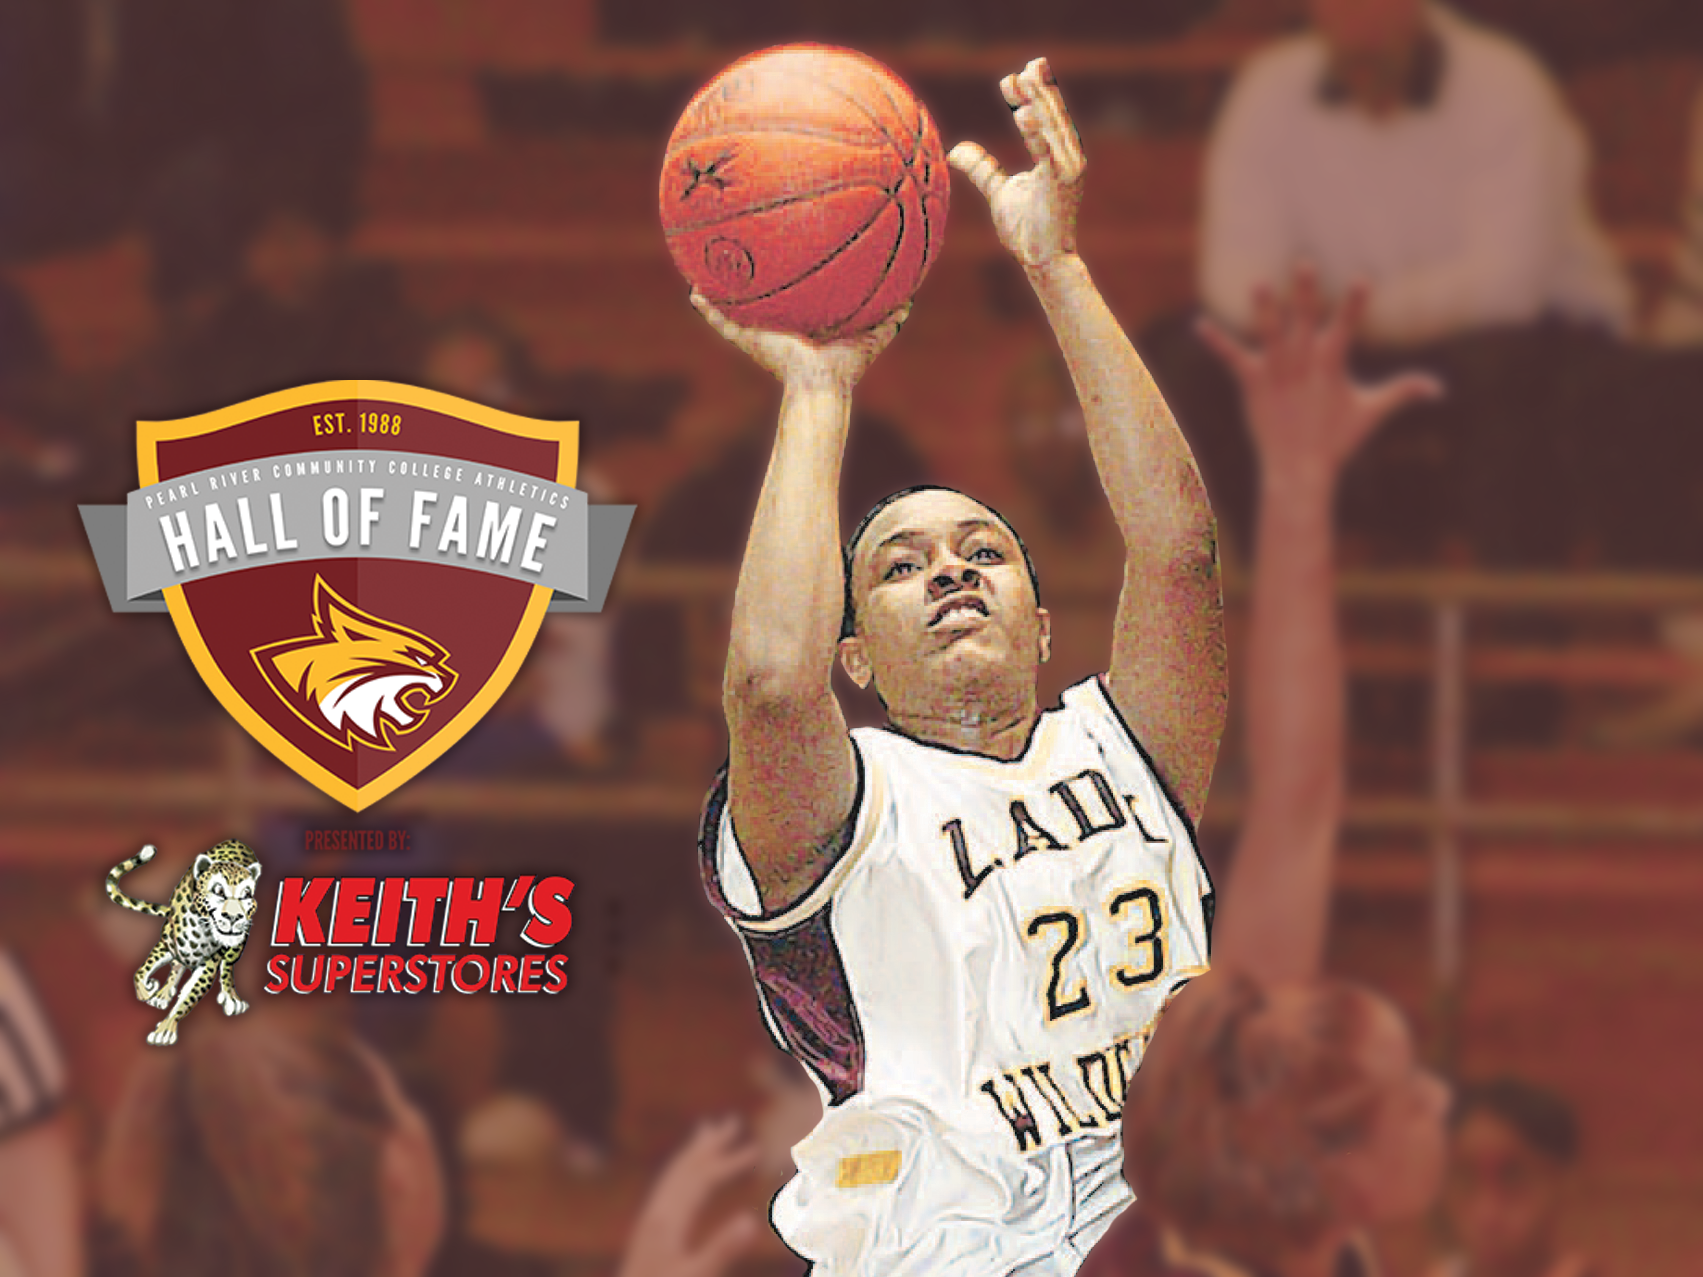 Women's basketball All-American set to be enshrined in Hall of Fame